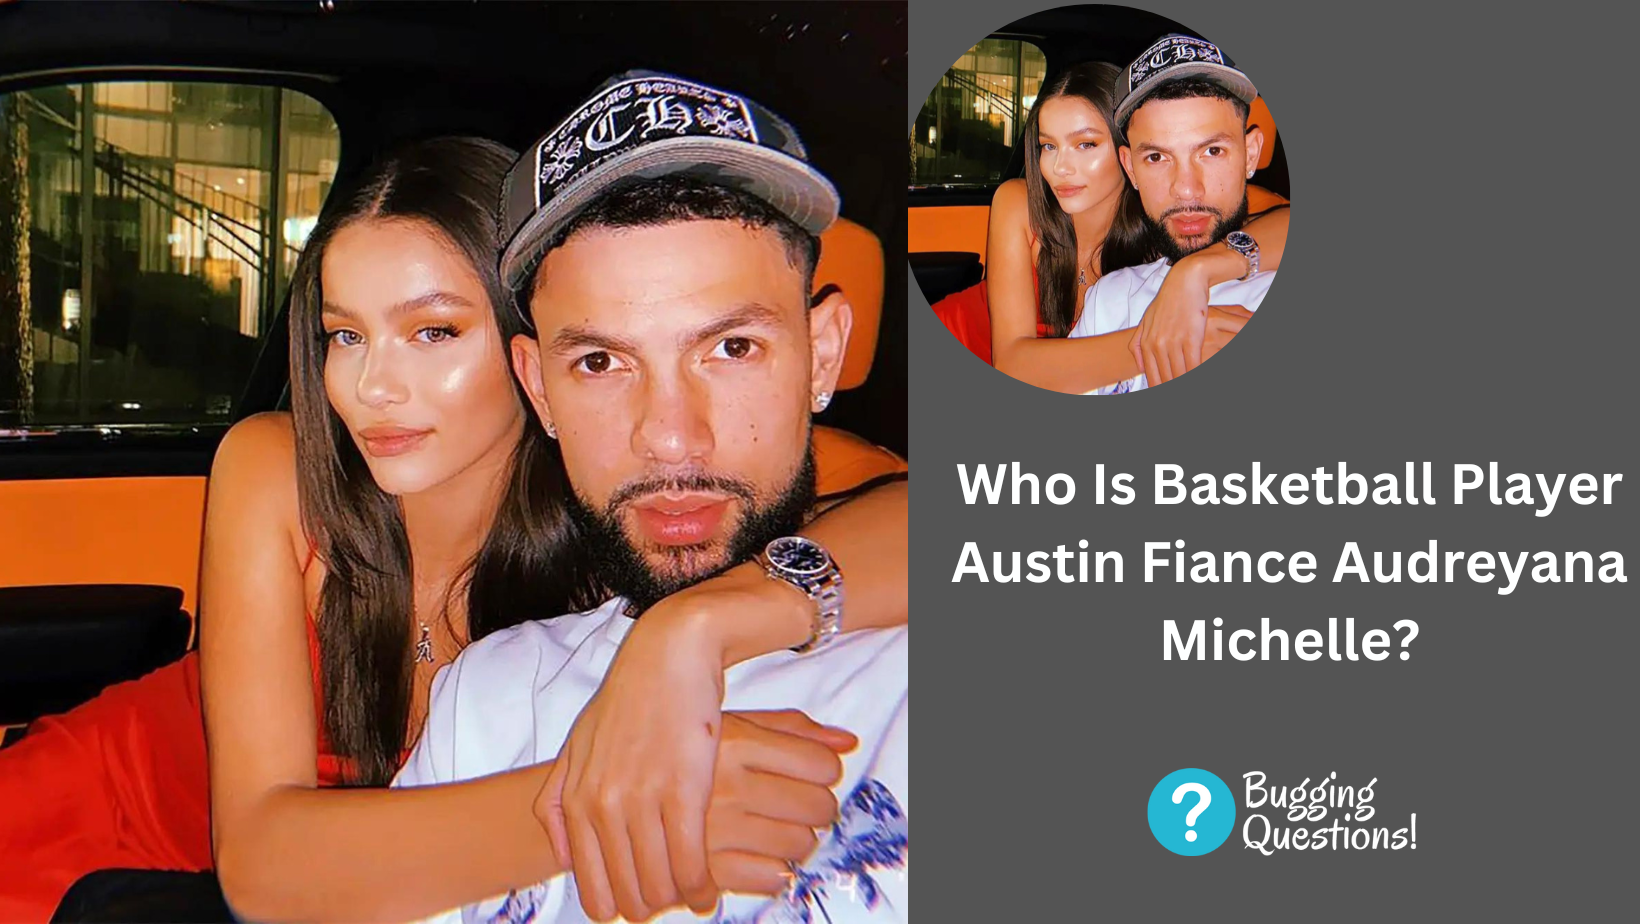 Who Is Basketball Player Austin Fiance Audreyana Michelle?